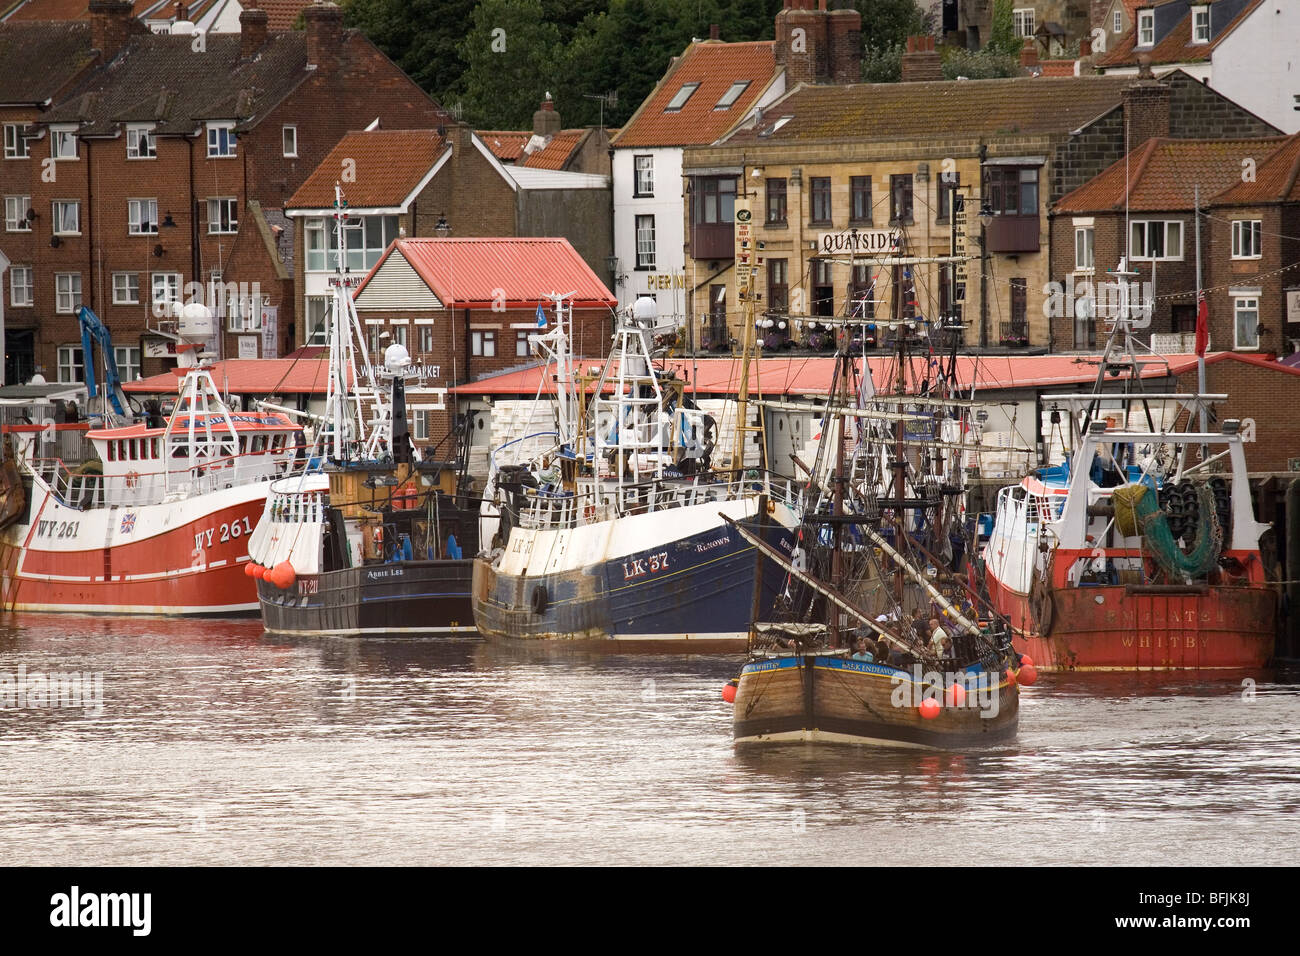 A replica of James Cook's ship, the bark HMS Endeavor, sets sail at Whitby in North Yorkshire, England. Stock Photo